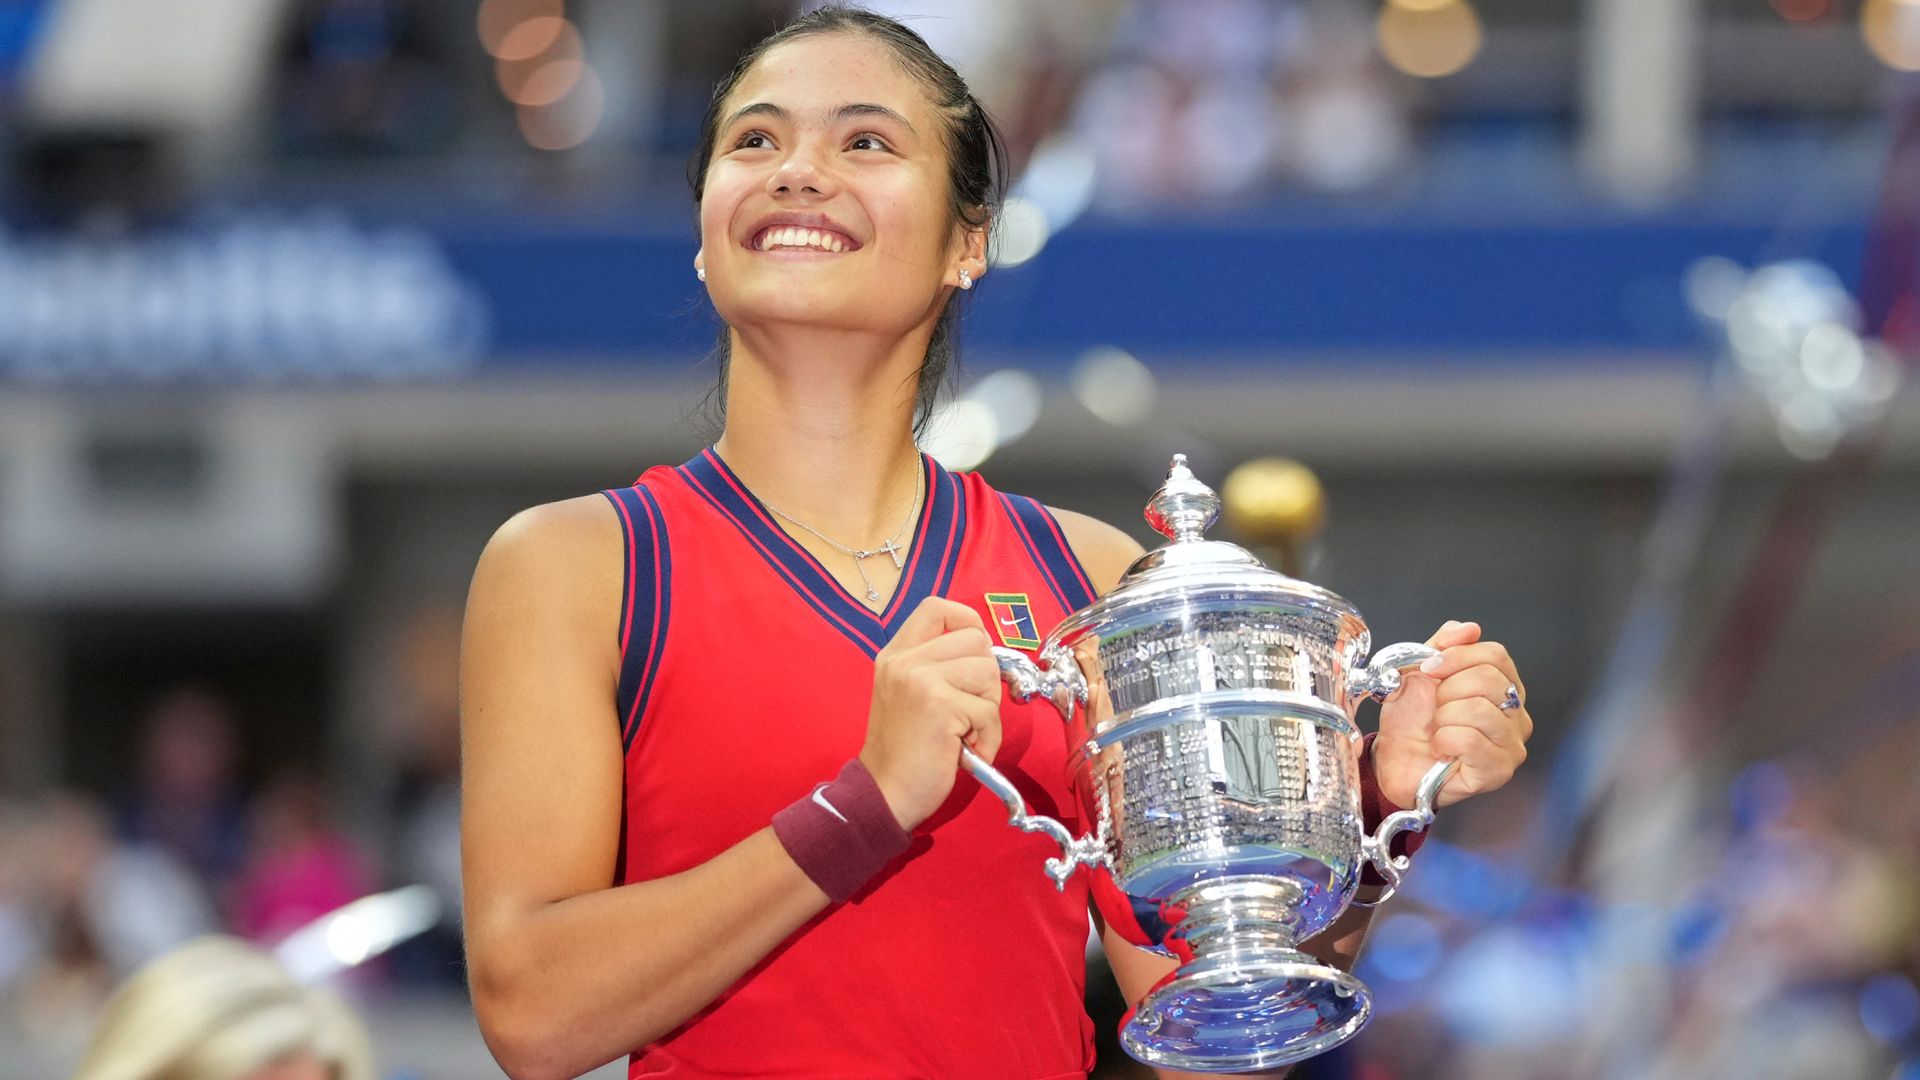 Remembering Raducanu's US Open win: From Bromley to Queen of New York